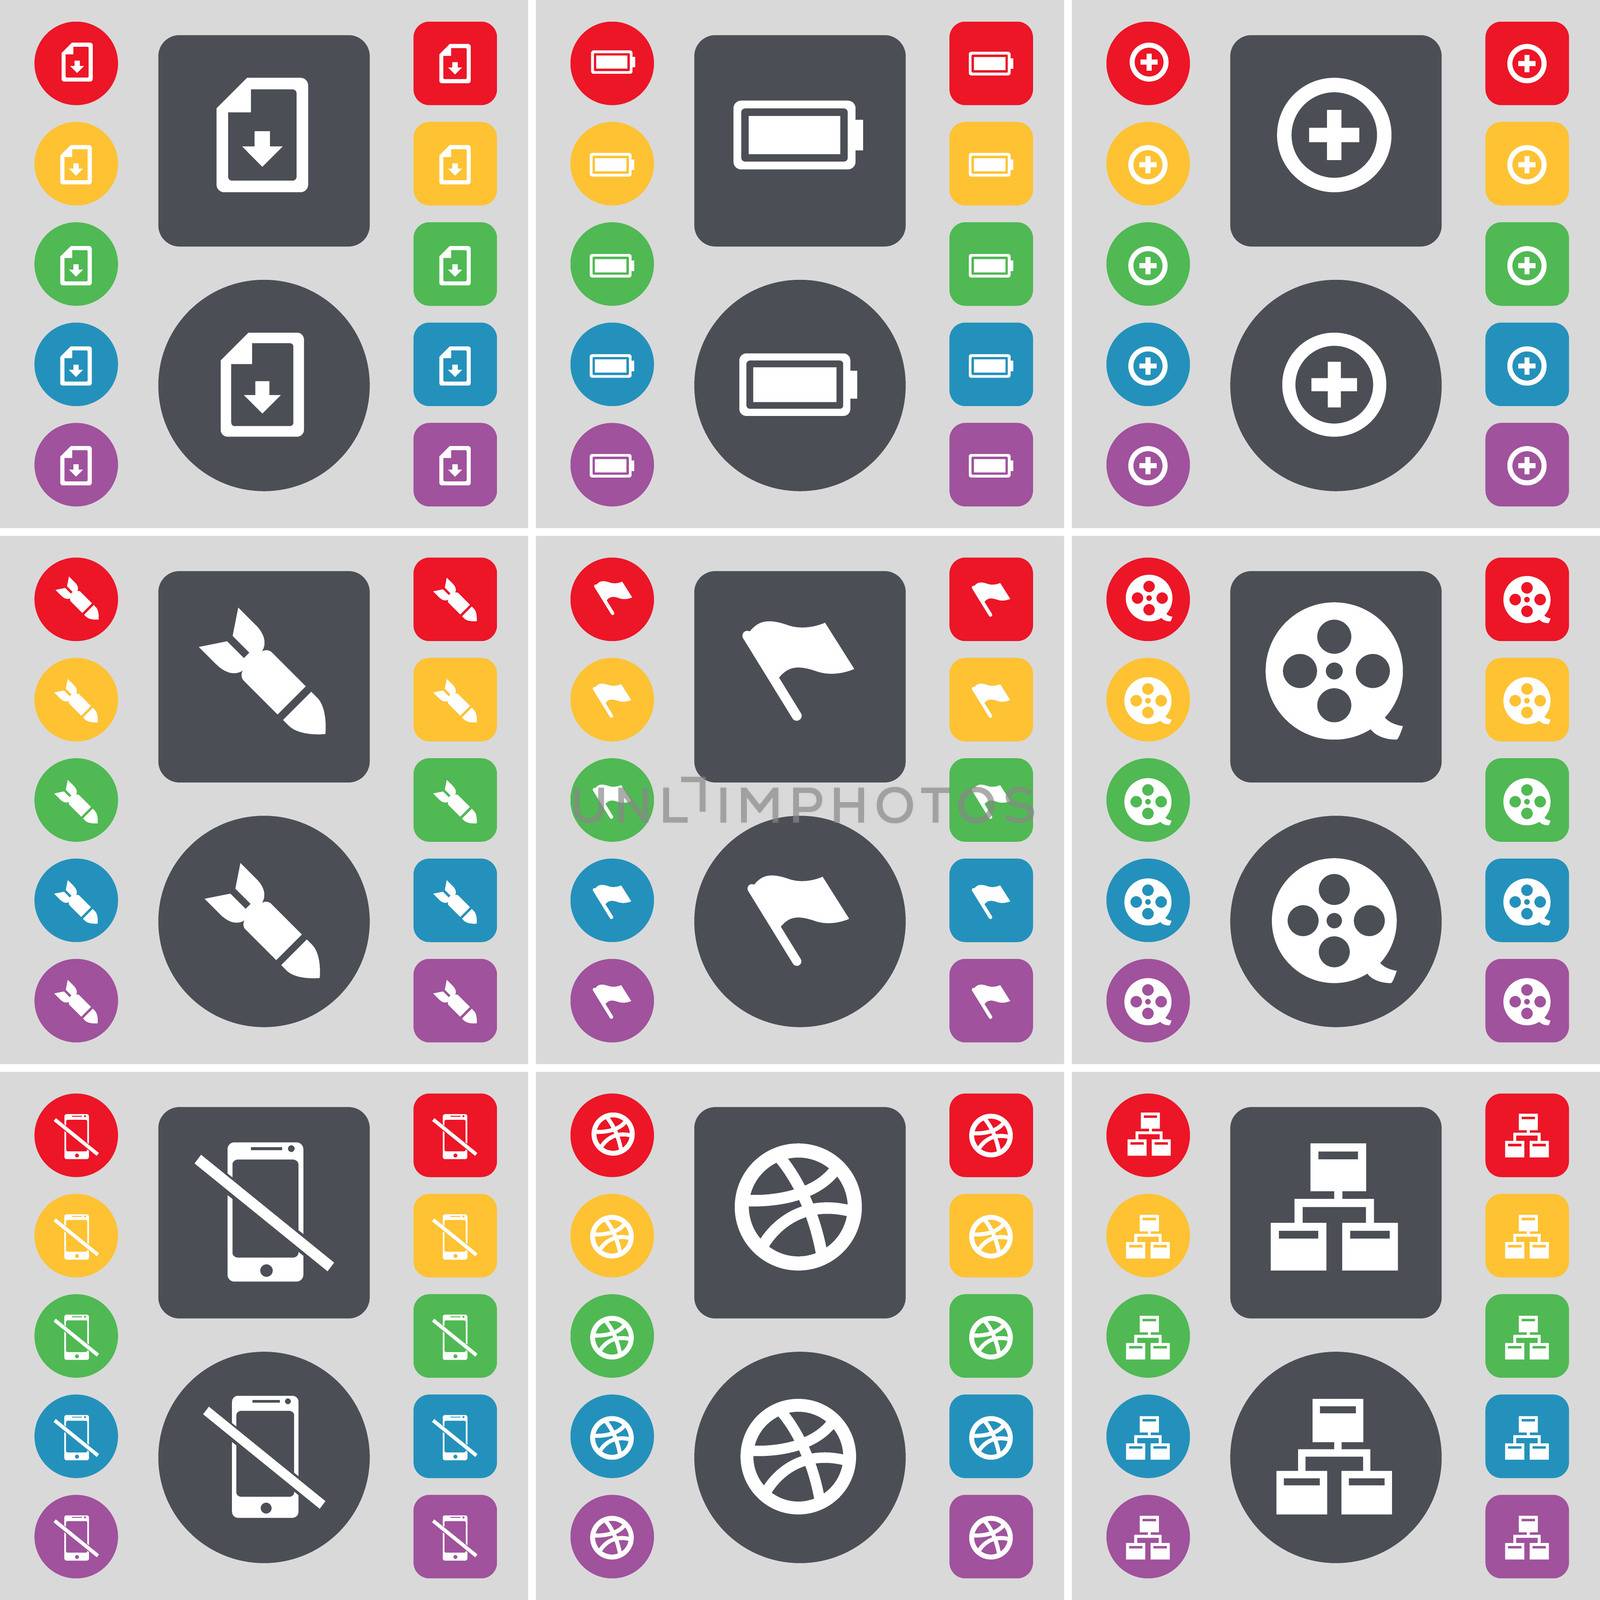 Download file, Battery, Plus, Rocket, Flag, Videotape, Smartphone, Ball, Network icon symbol. A large set of flat, colored buttons for your design. illustration